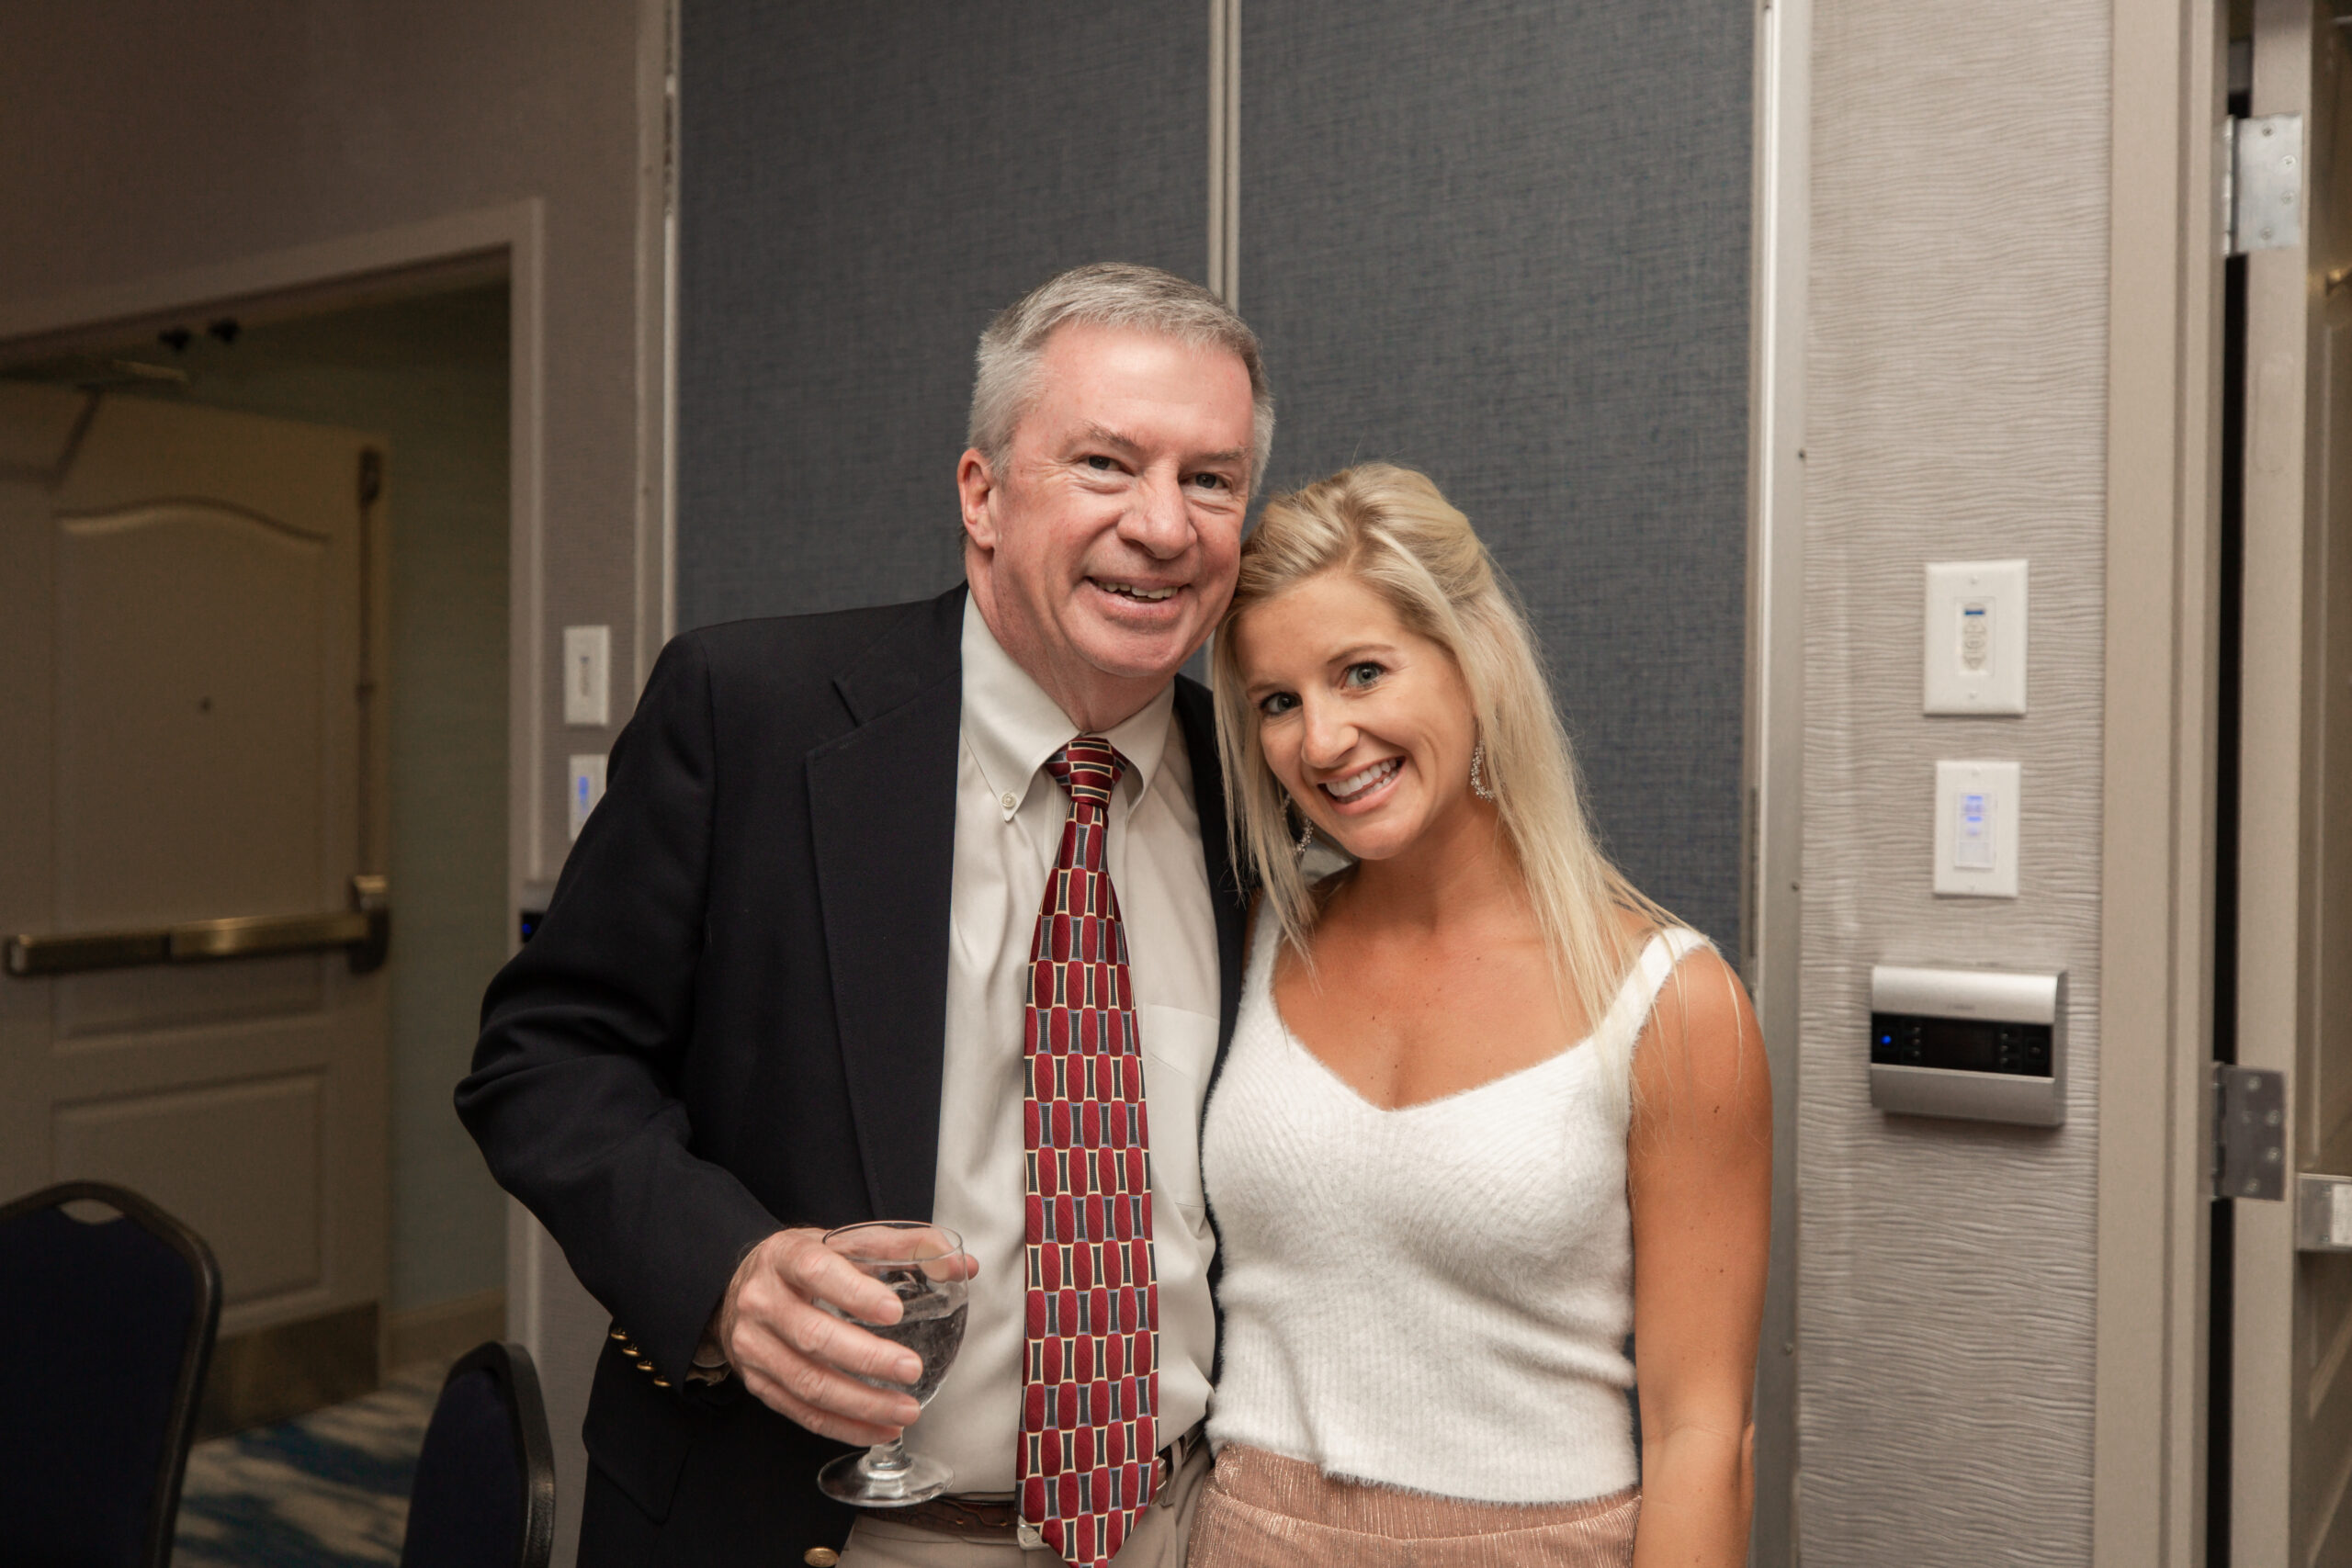 Broker-in-Charge Jim Parker with Broker Associate Britni Belair enjoying the office Christmas party